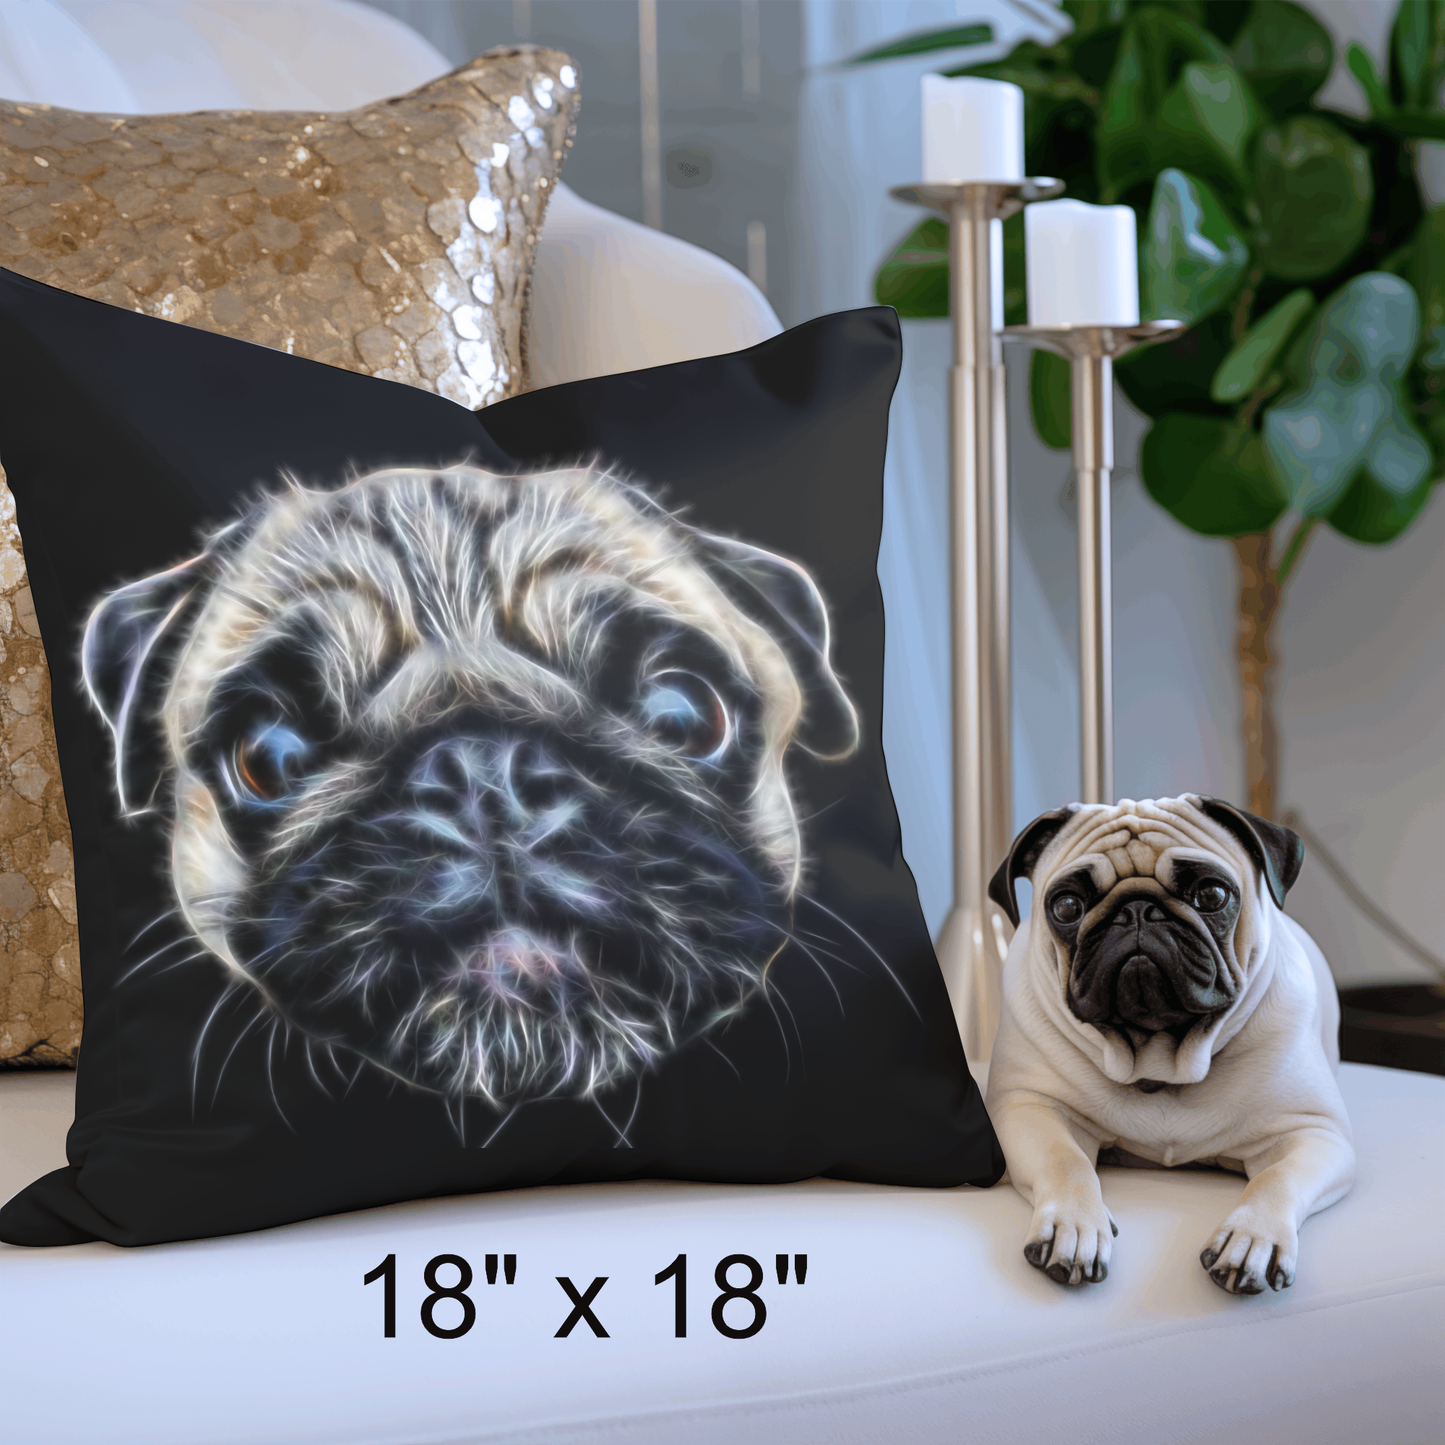 Black Cockapoo Cushion with Pillow Insert